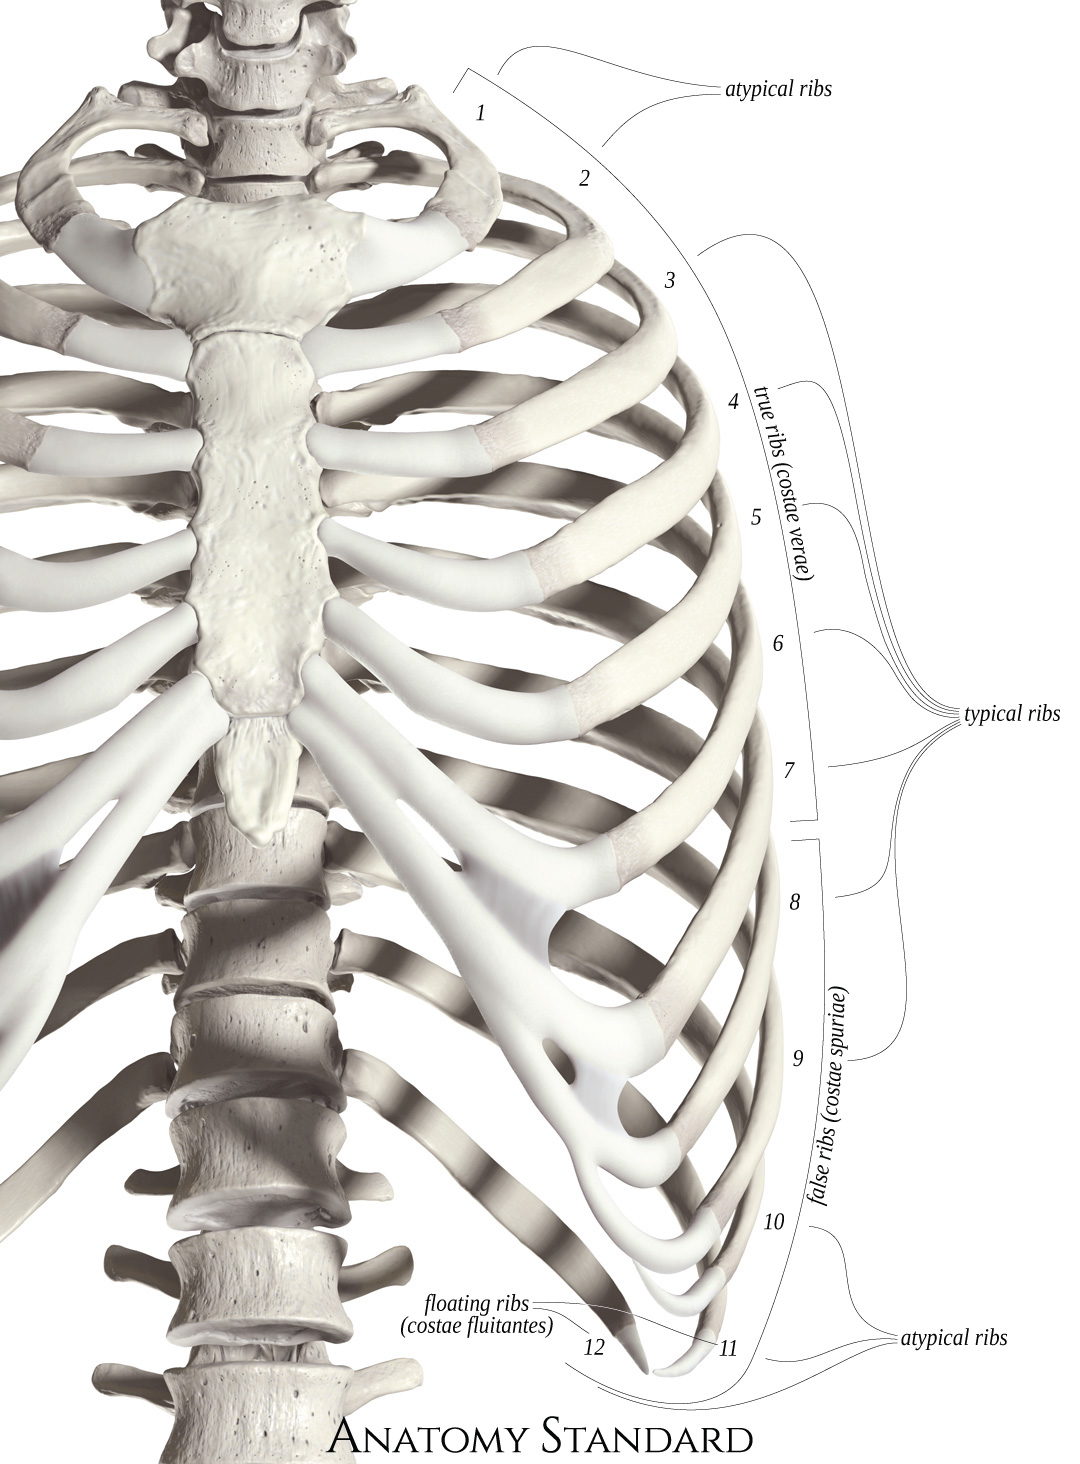 Anatomy Standard - Drawing Classification of the ribs - Latin labels ...